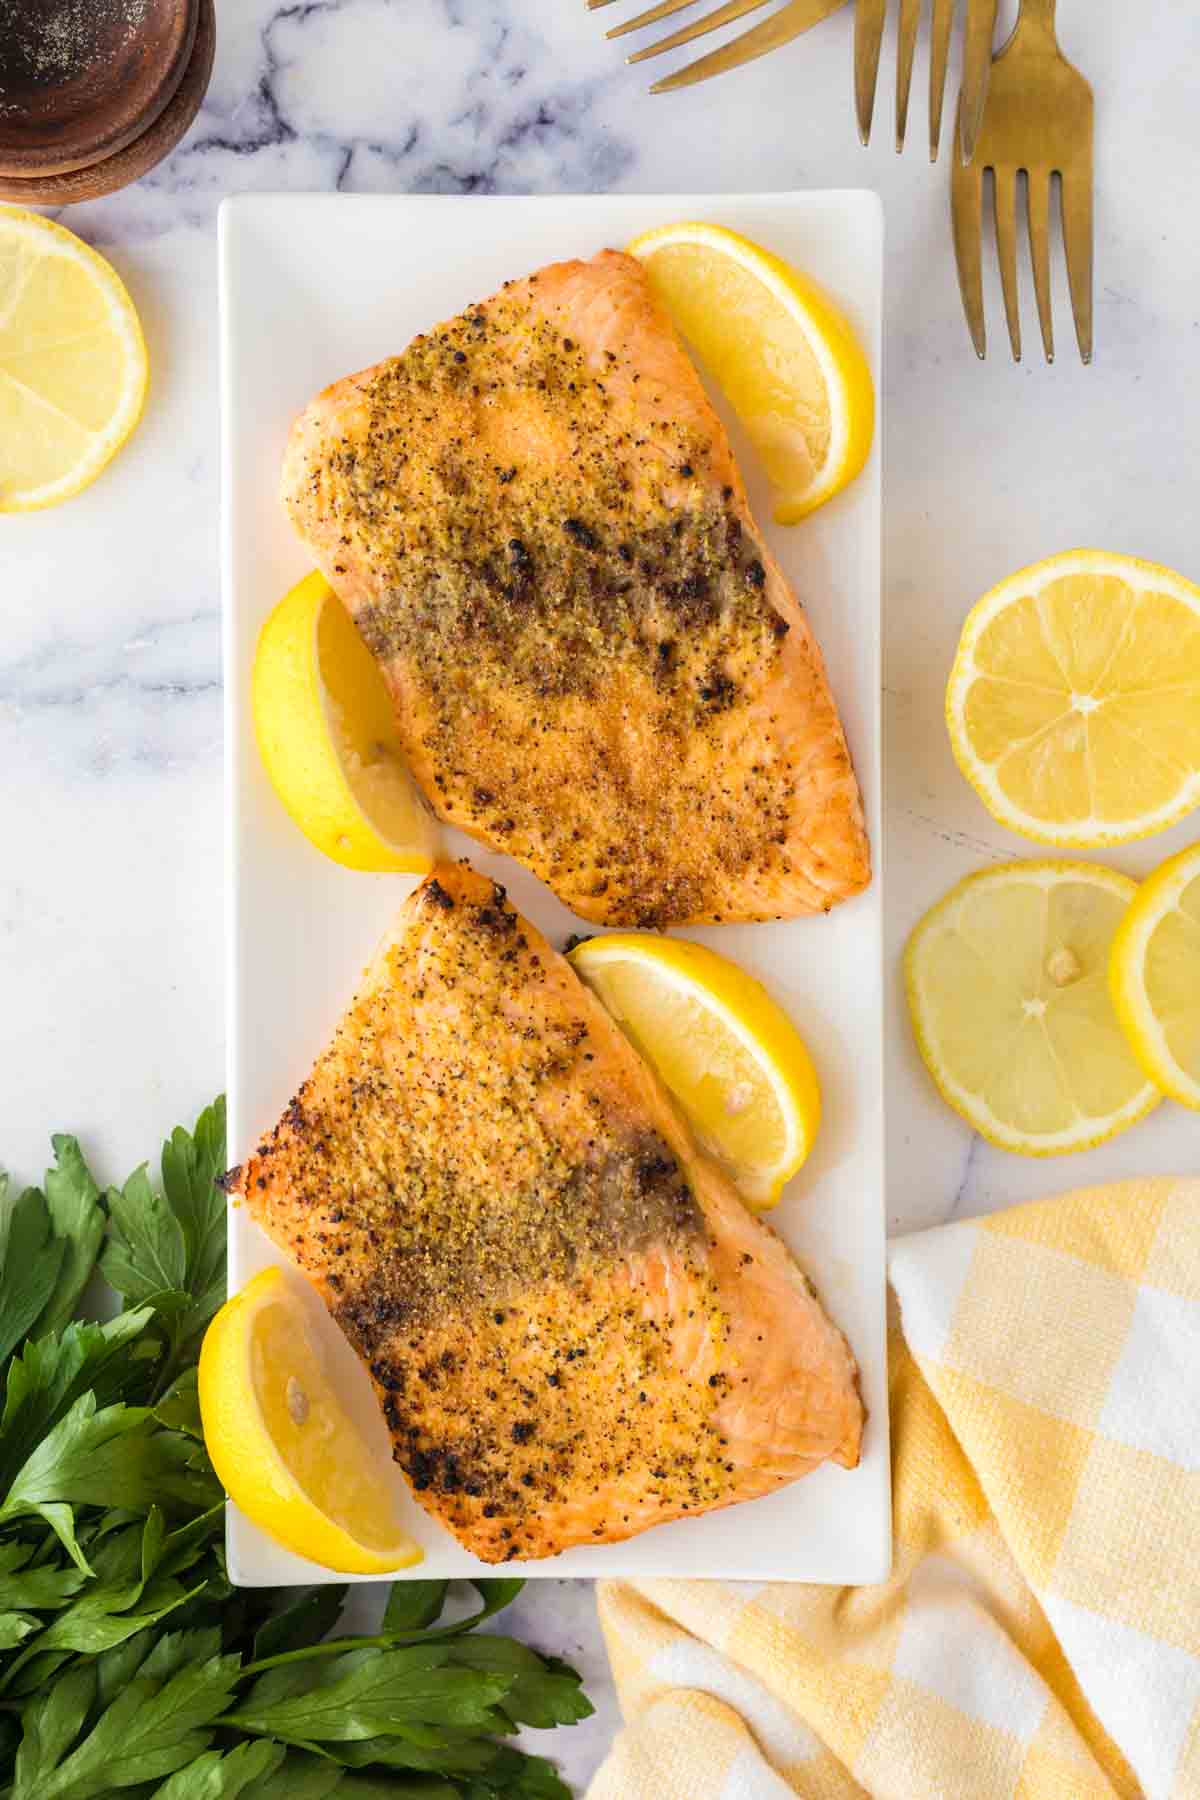 Cooked salmon filets served on a white plate with lemons.